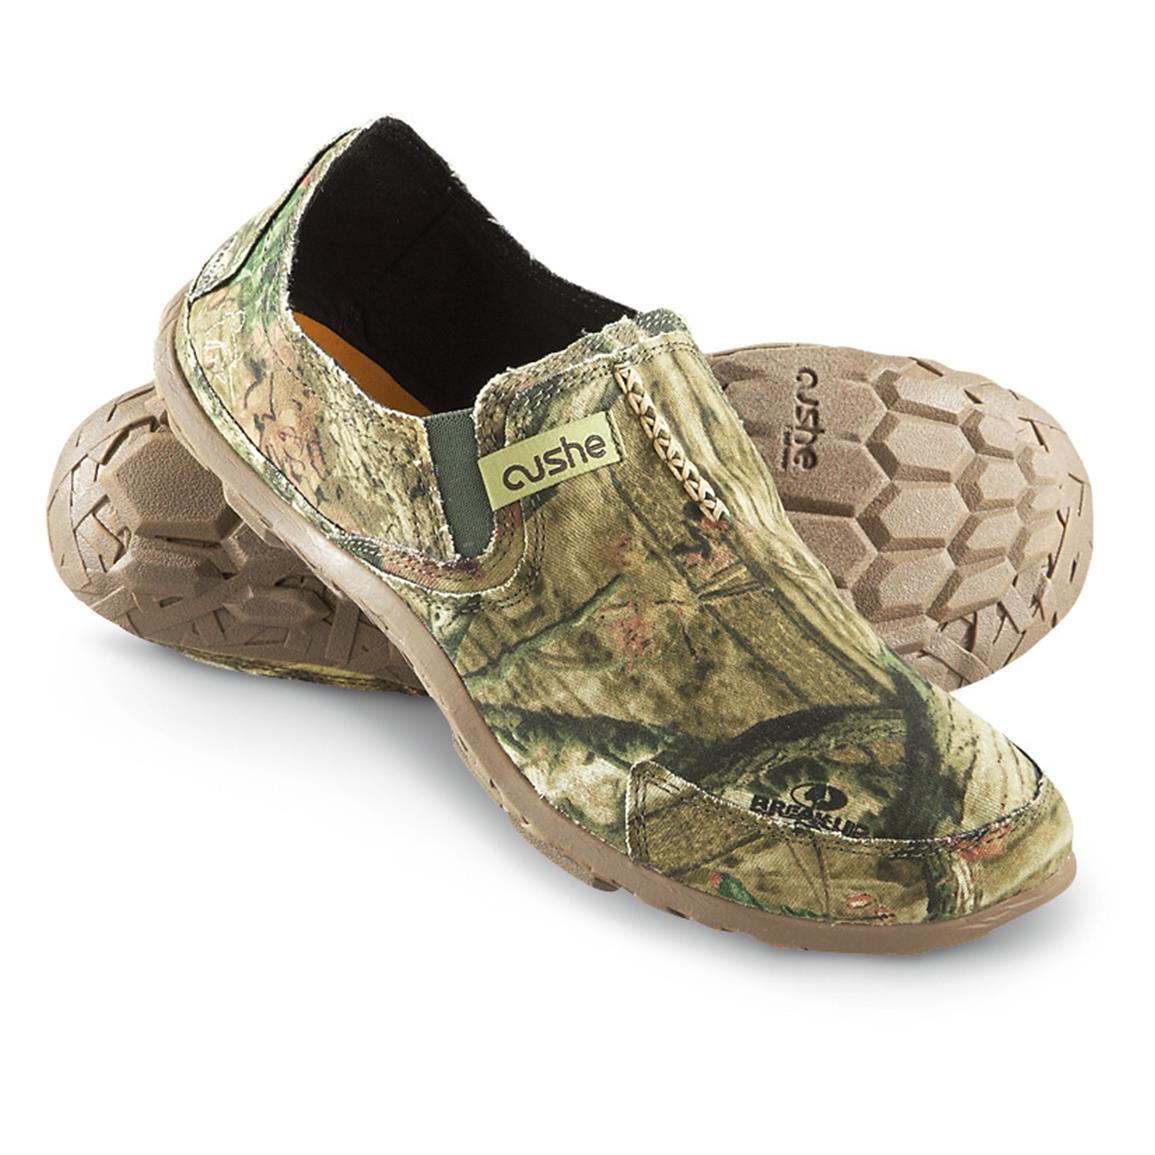 Cushe Mossy Oak Men's Slip-on Casual Shoes - 622139, Casual Shoes at ...